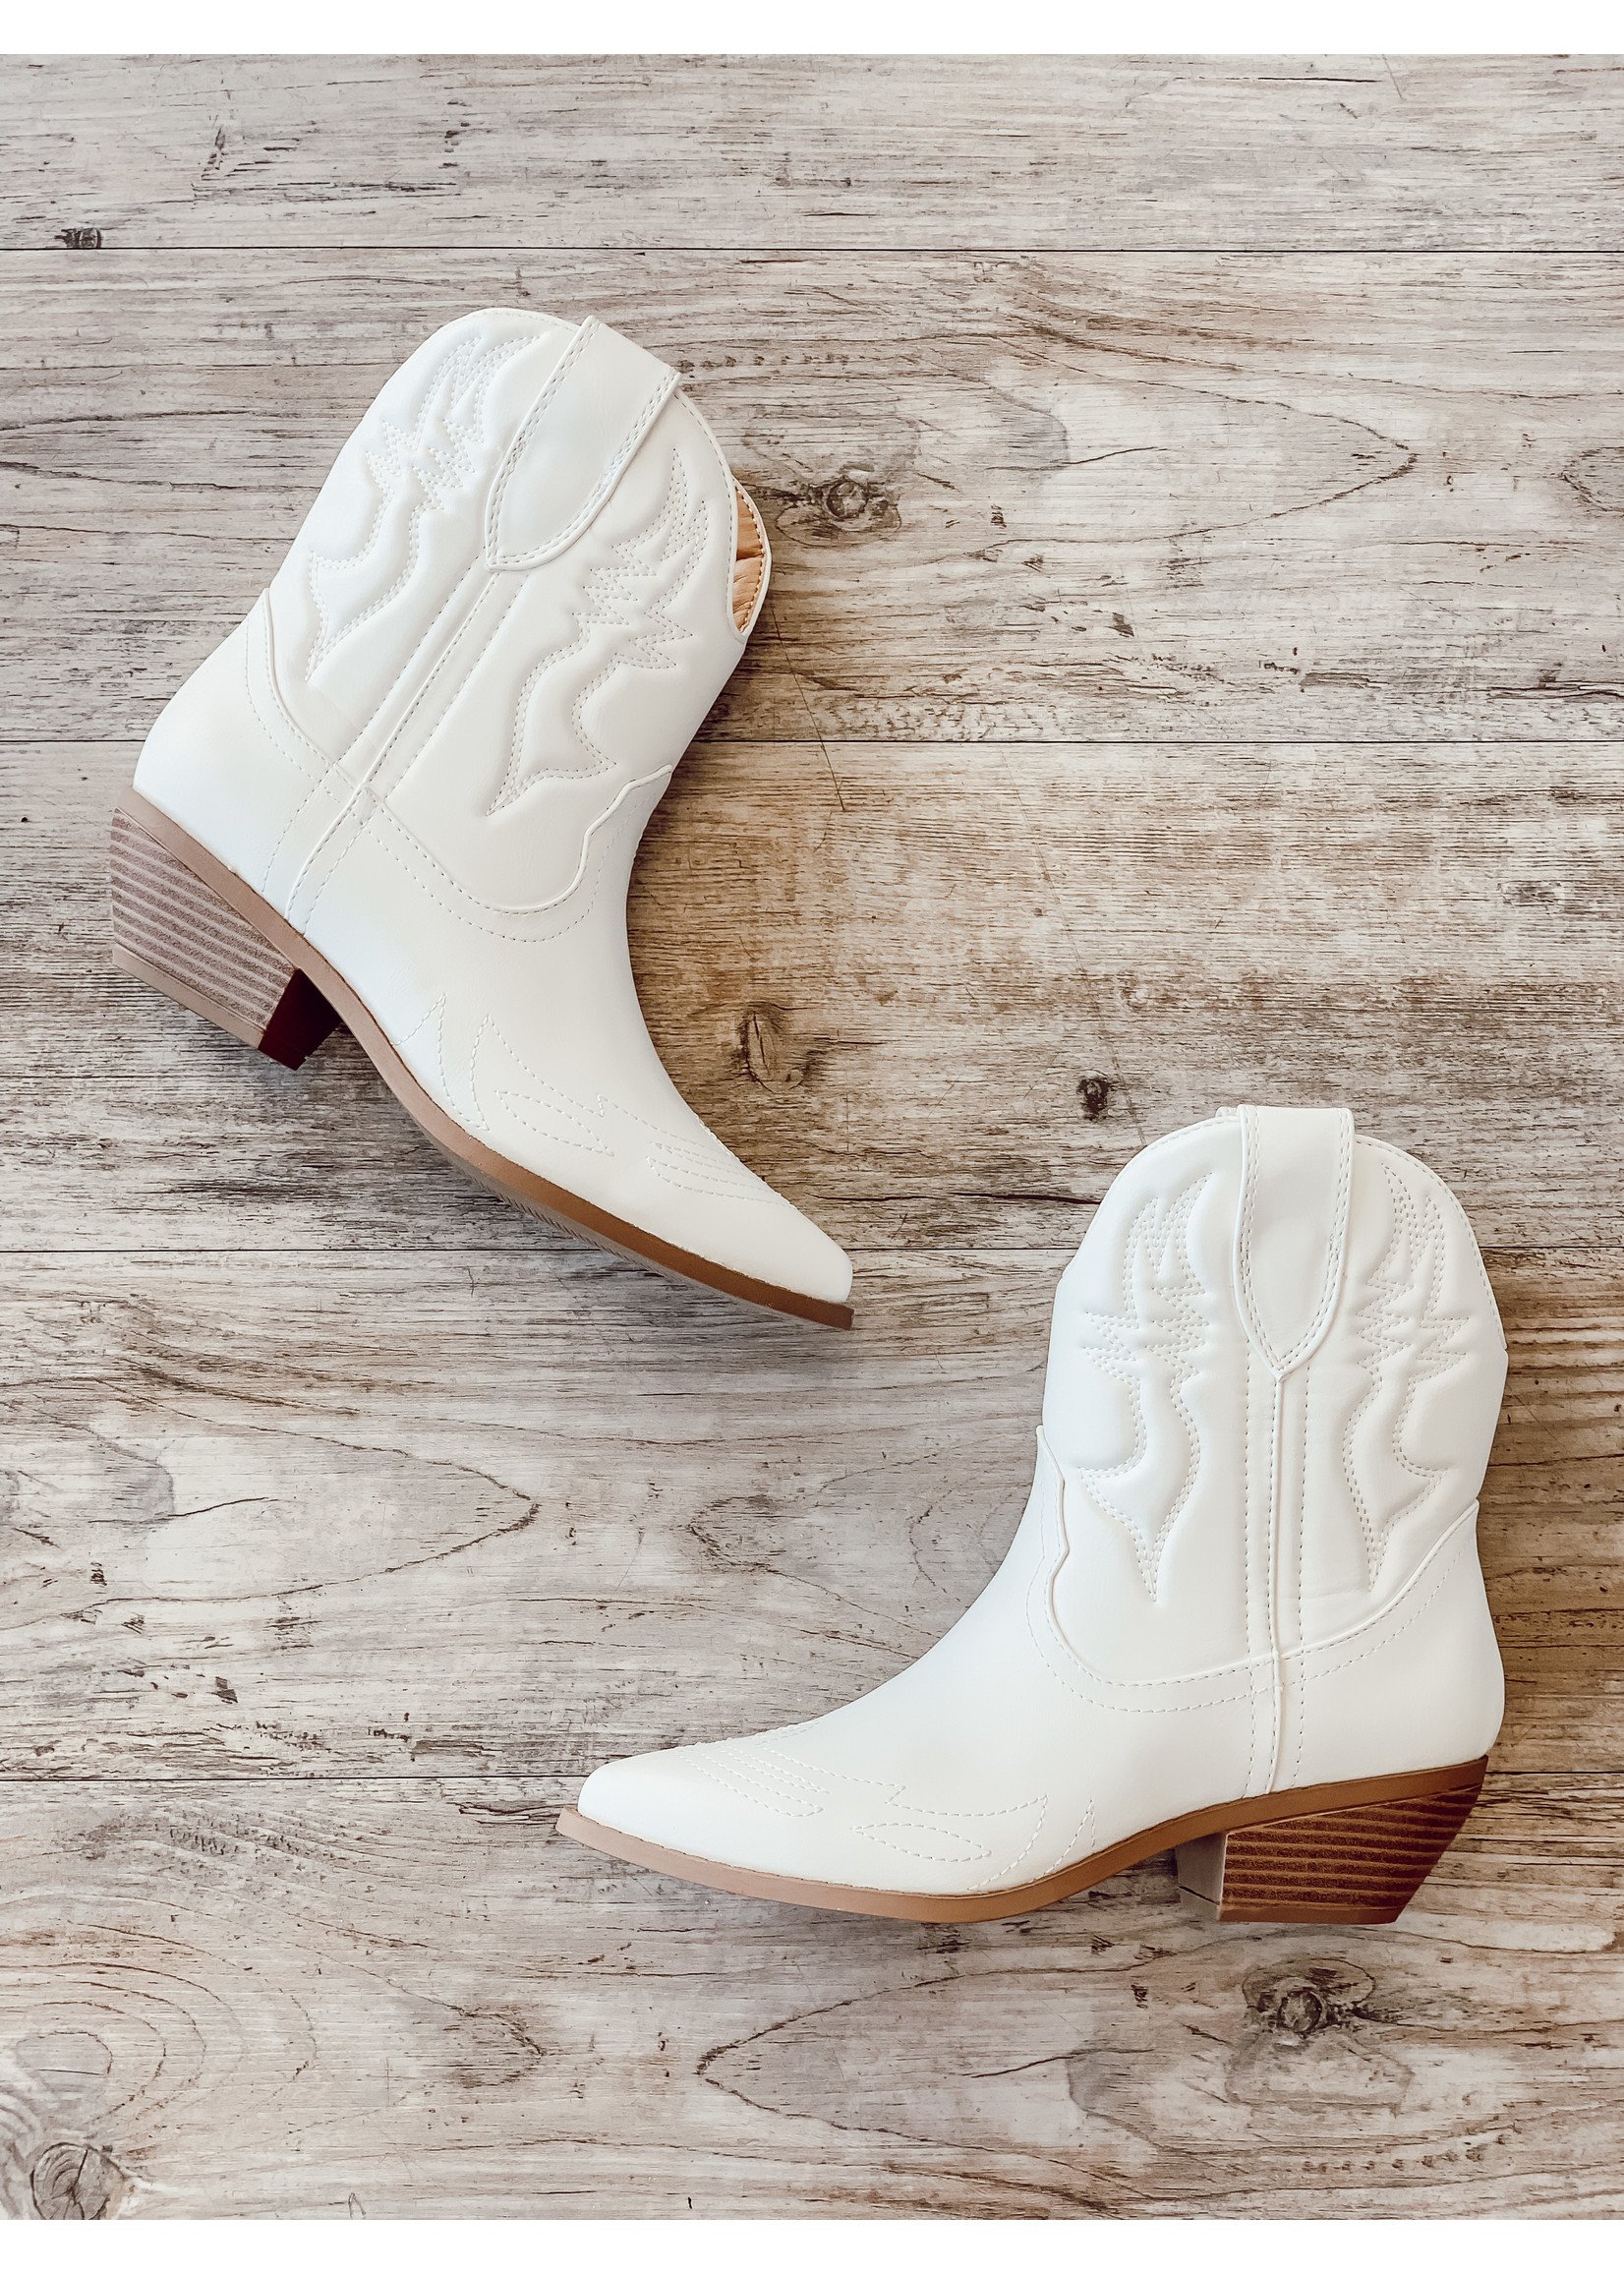 The Nashville Faux Leather Western Boots - White